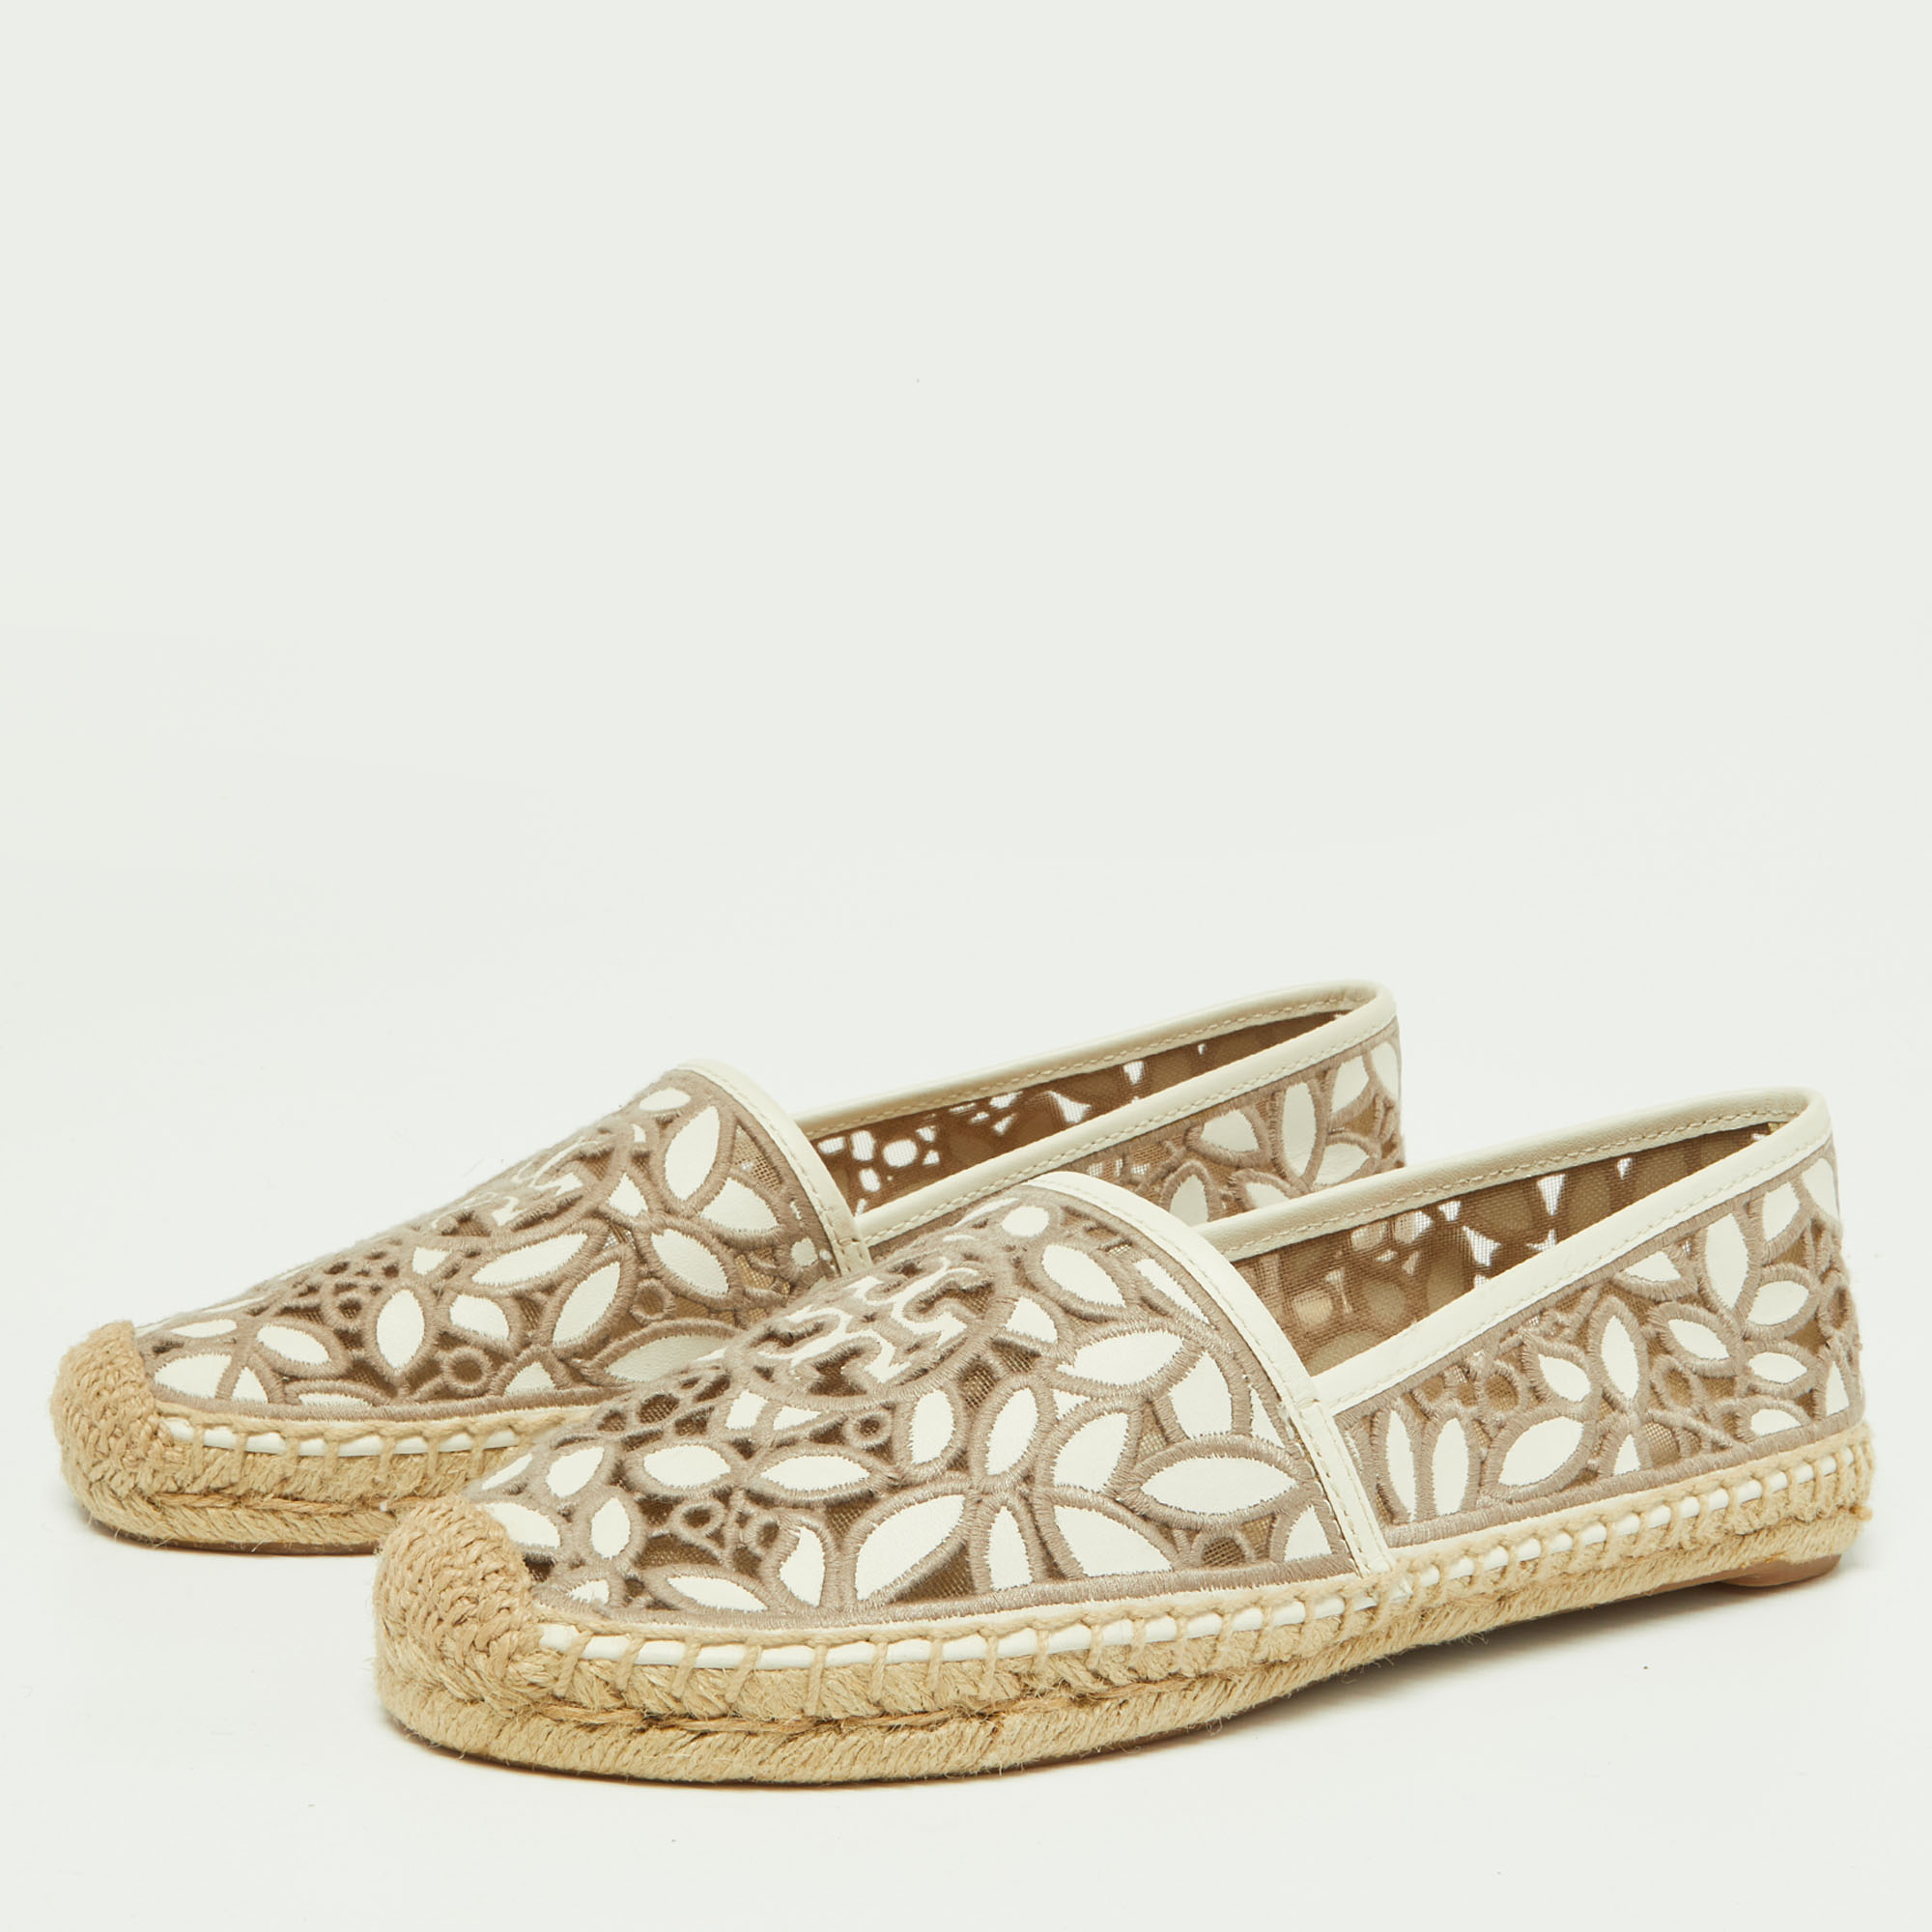 

Tory Burch White/Grey Embroidered Leather Rhea Espadrille Flats Size